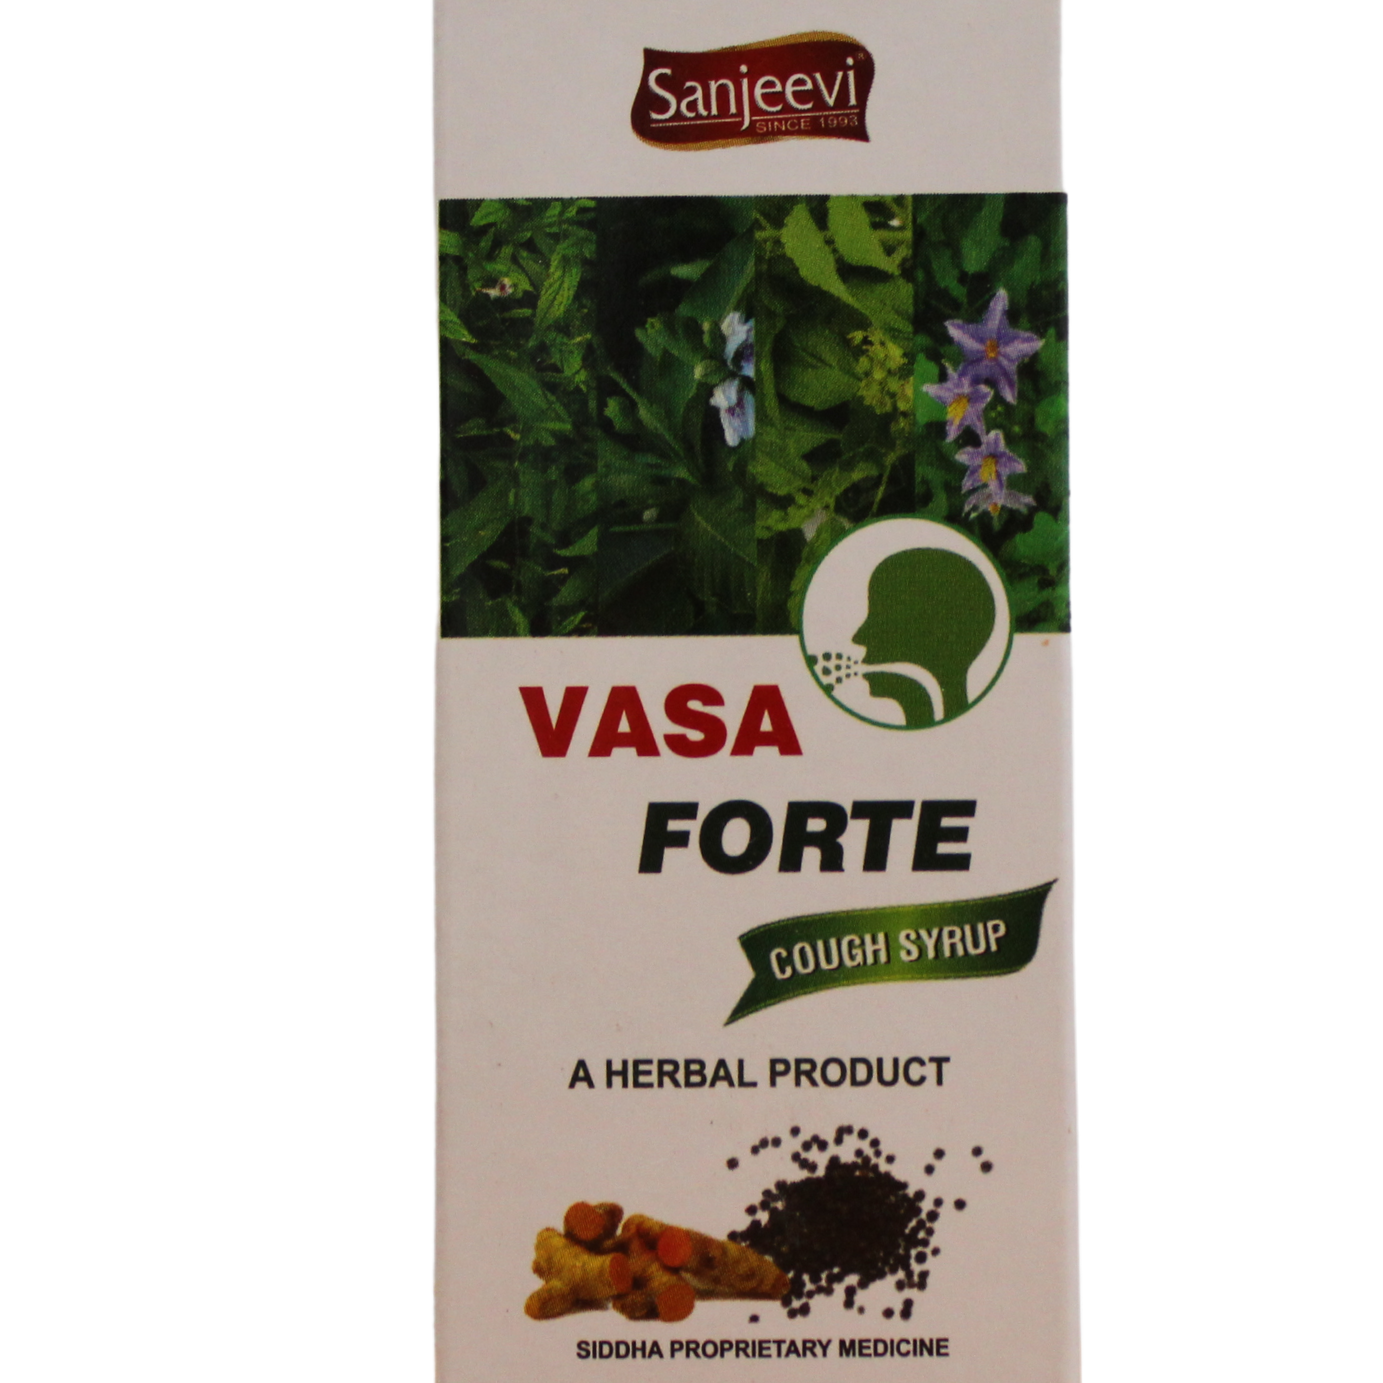 Shop Vasaforte Syrup 100ml at price 75.00 from Sanjeevi Online - Ayush Care